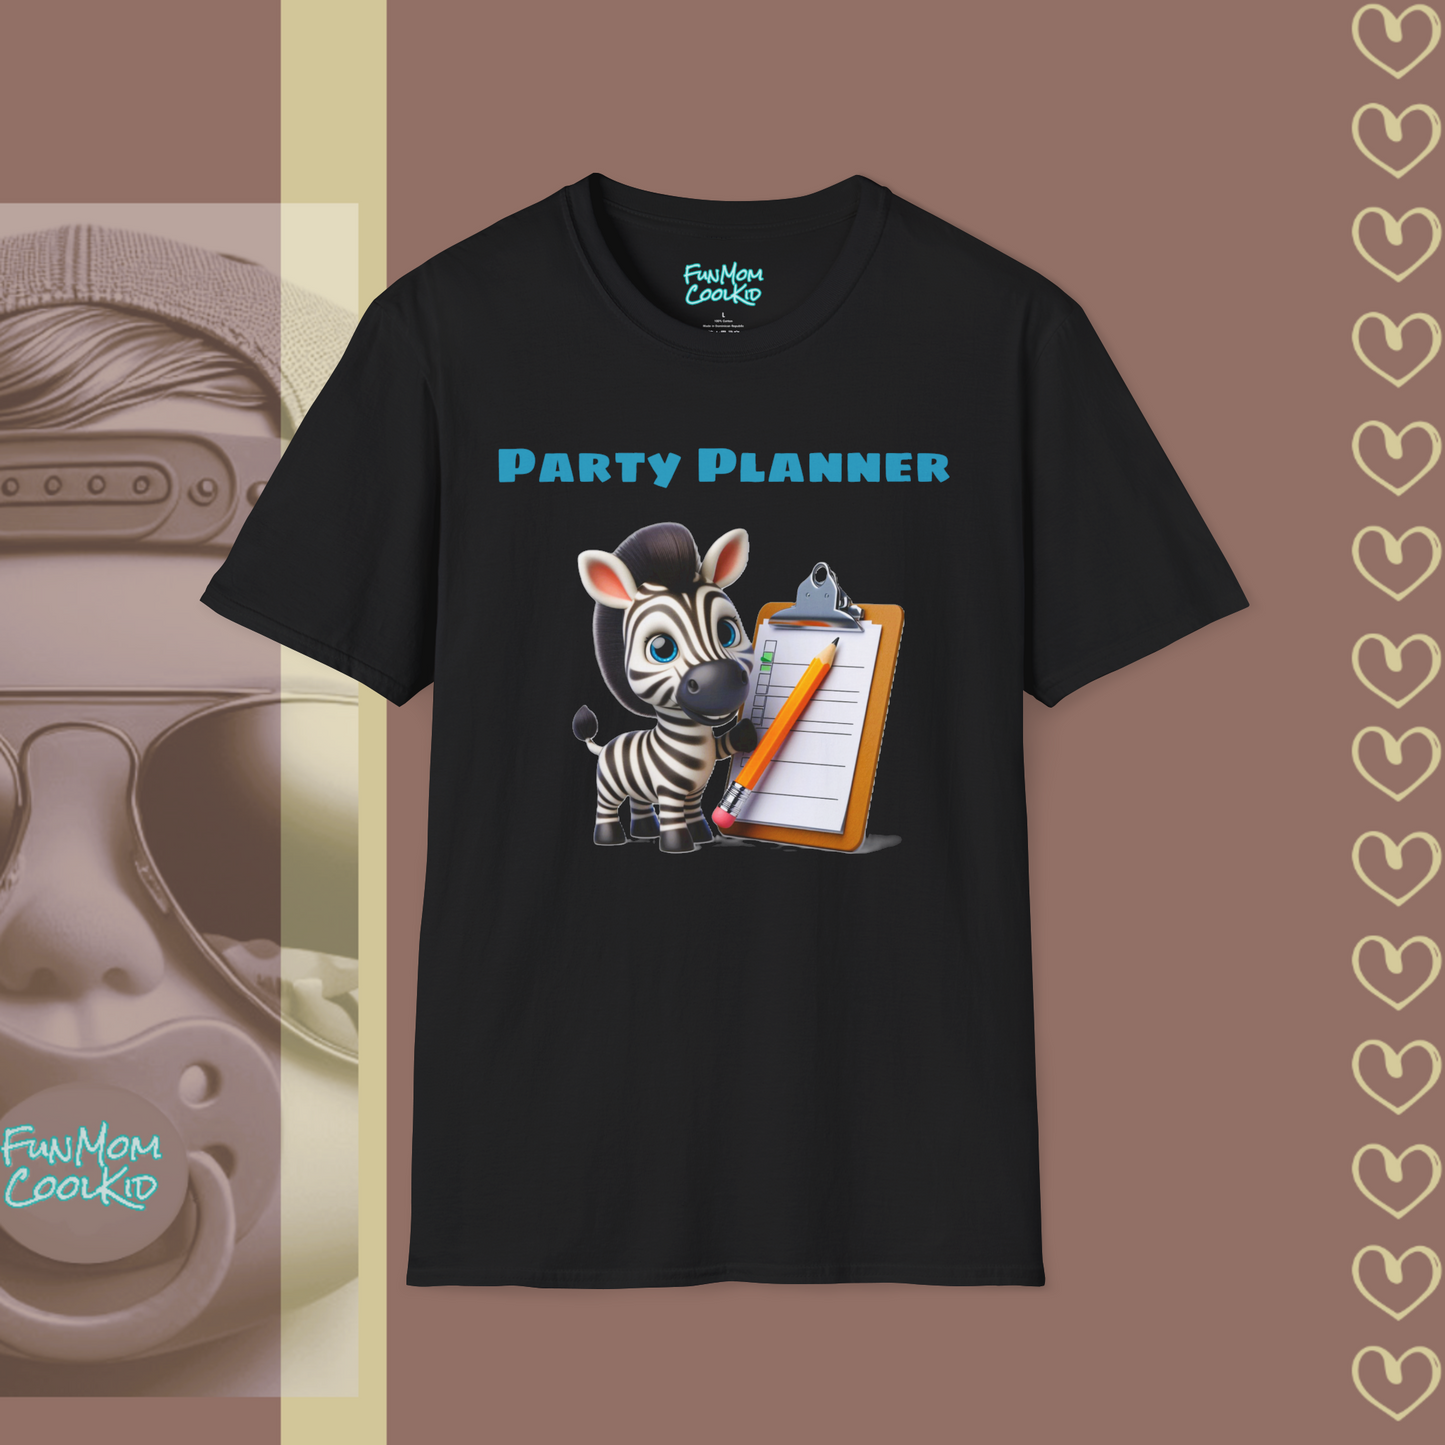 Party Planner | Adult Unisex Softstyle T-Shirt